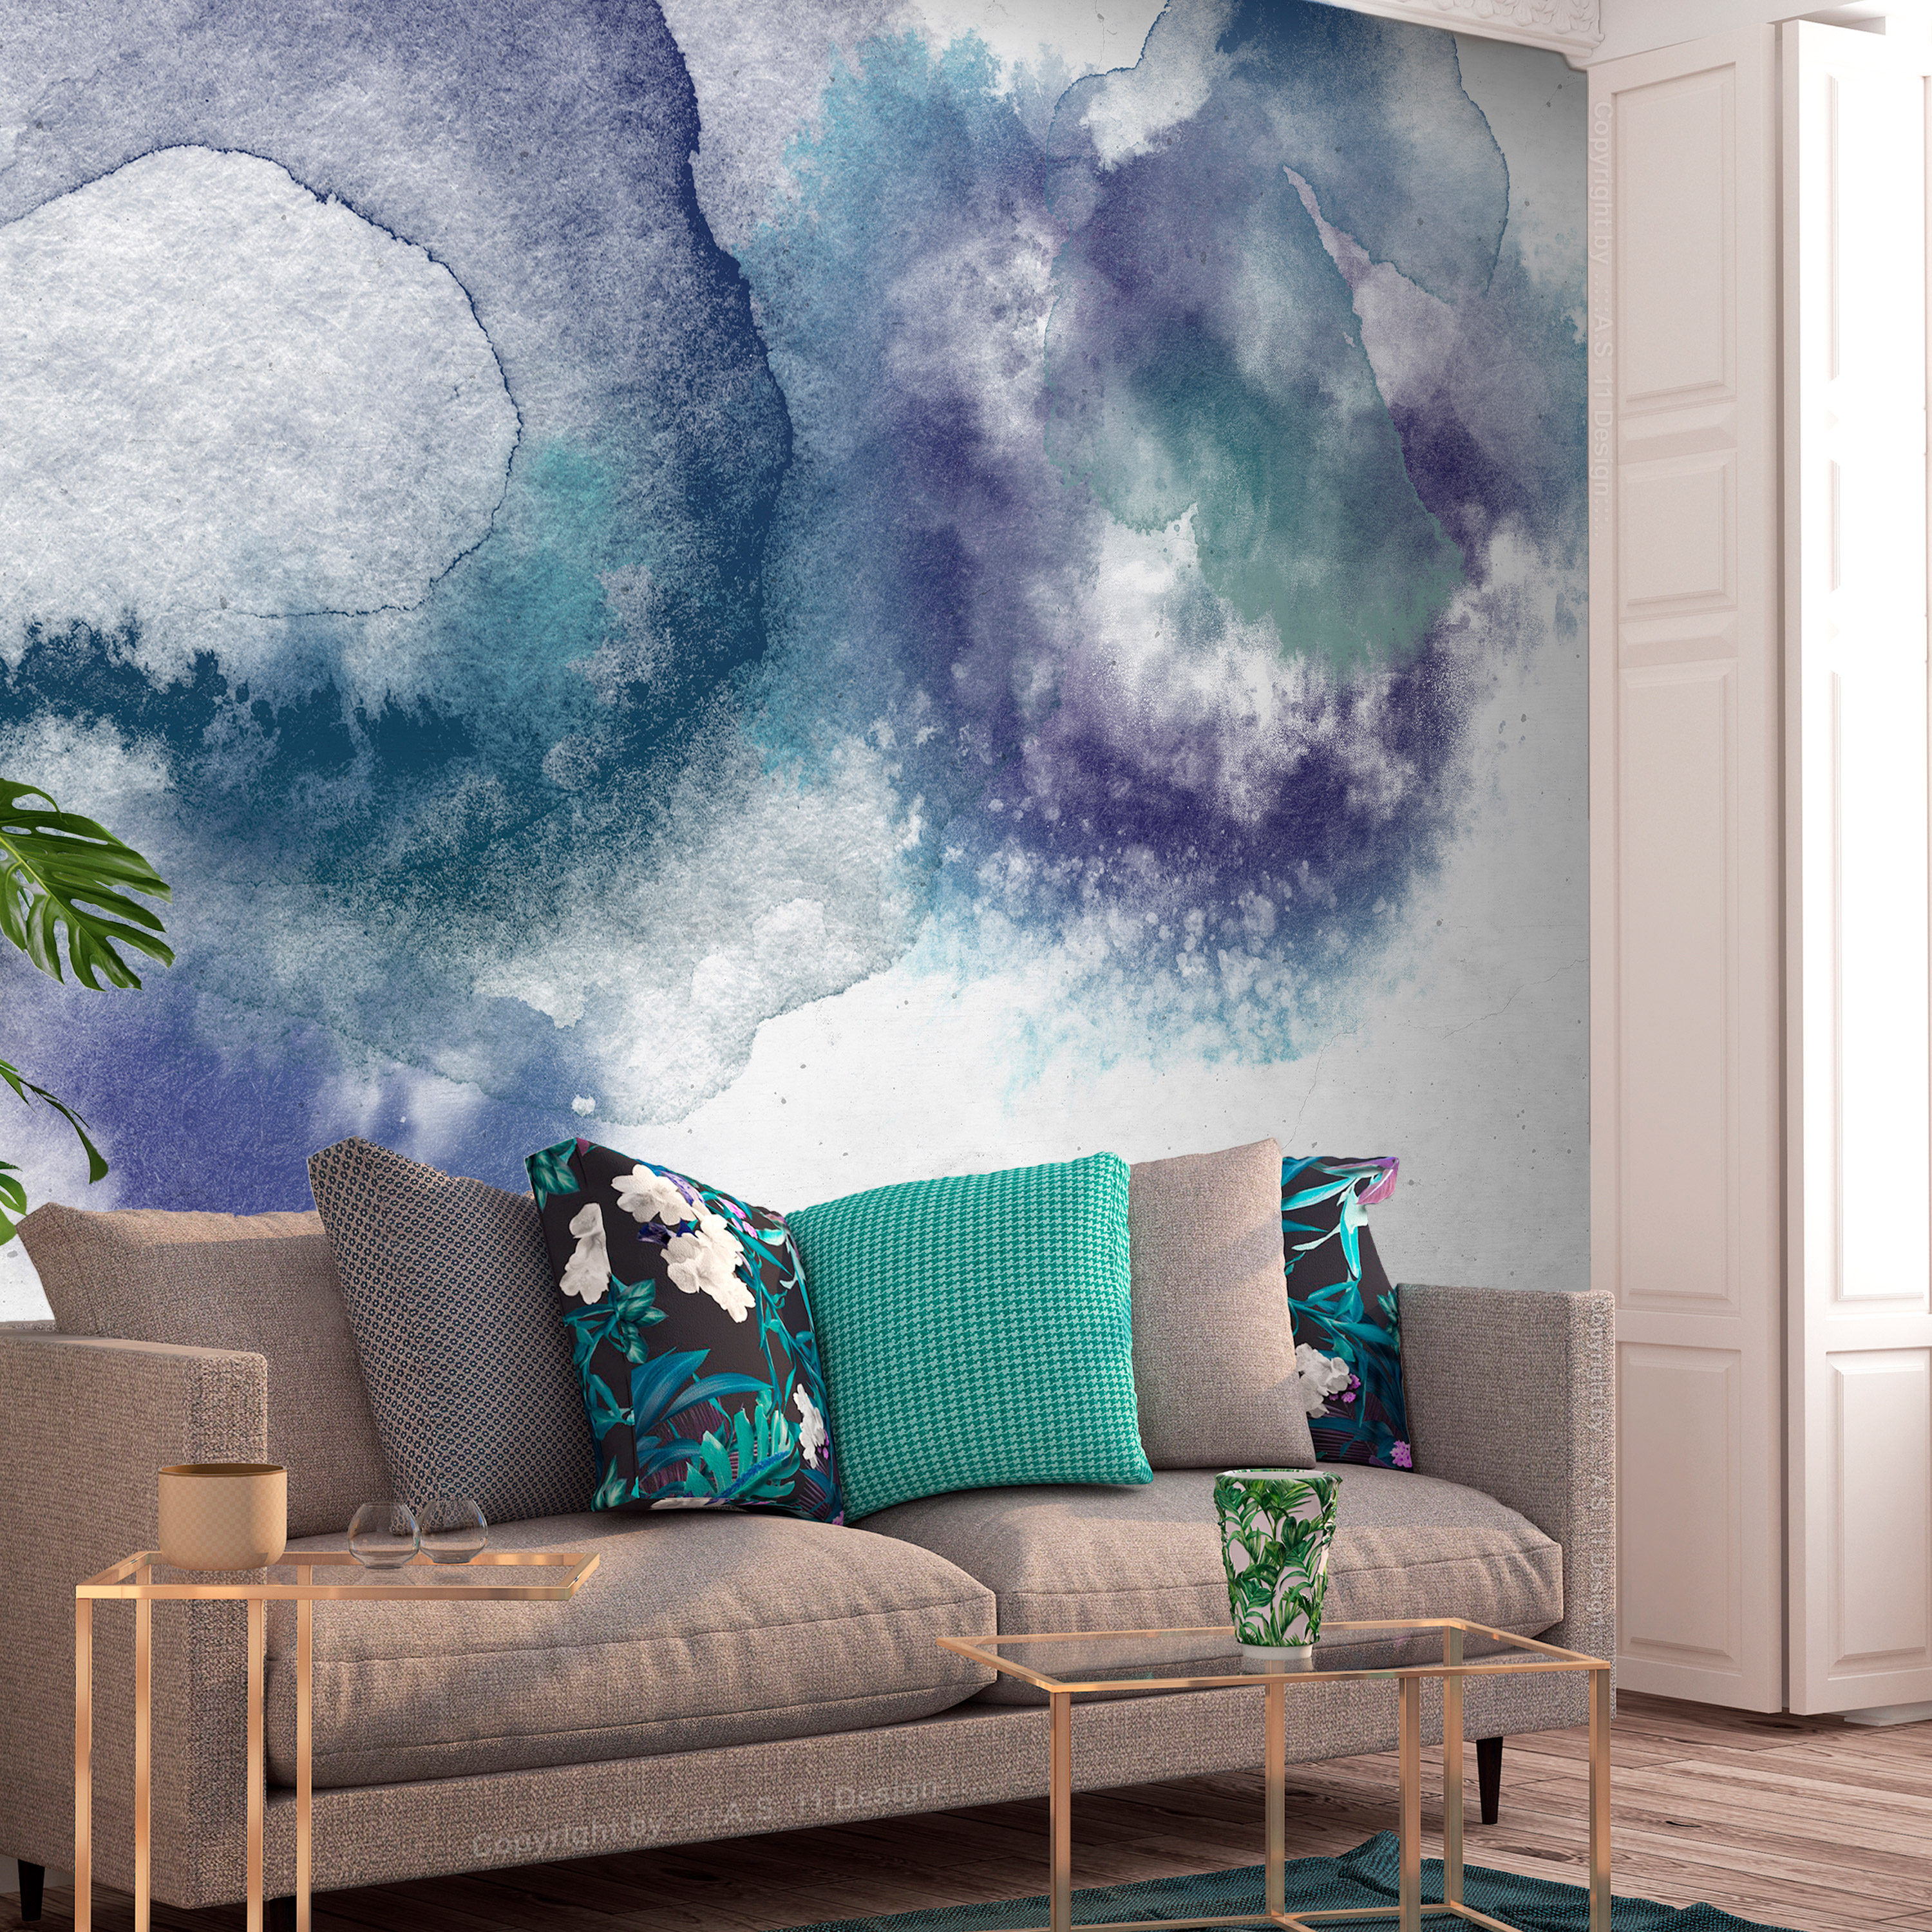 Self-adhesive Wallpaper - Painted Mirages - Second Variant - 98x70